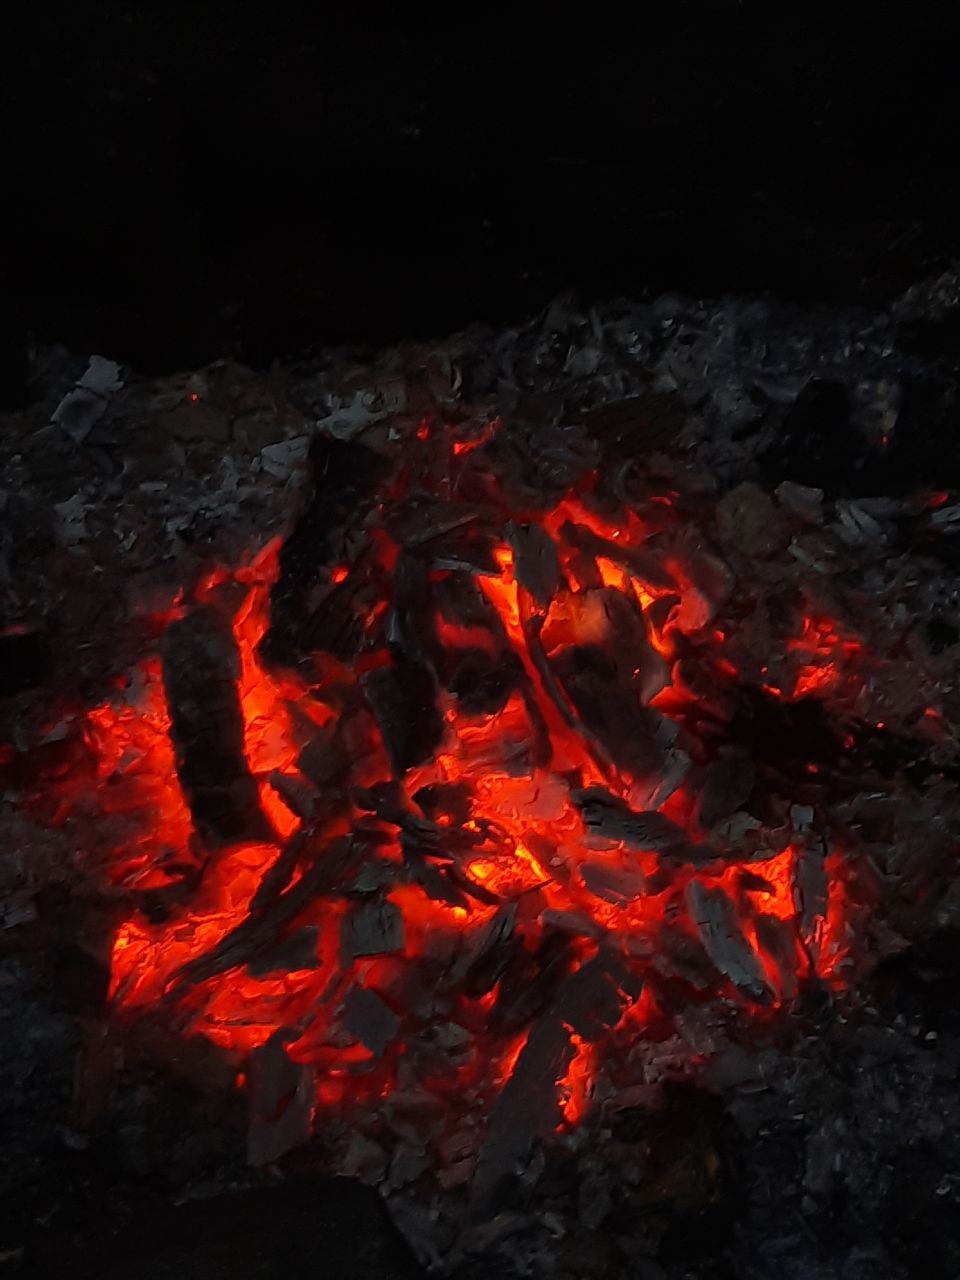 CLOSE-UP OF FIRE IN AUTUMN